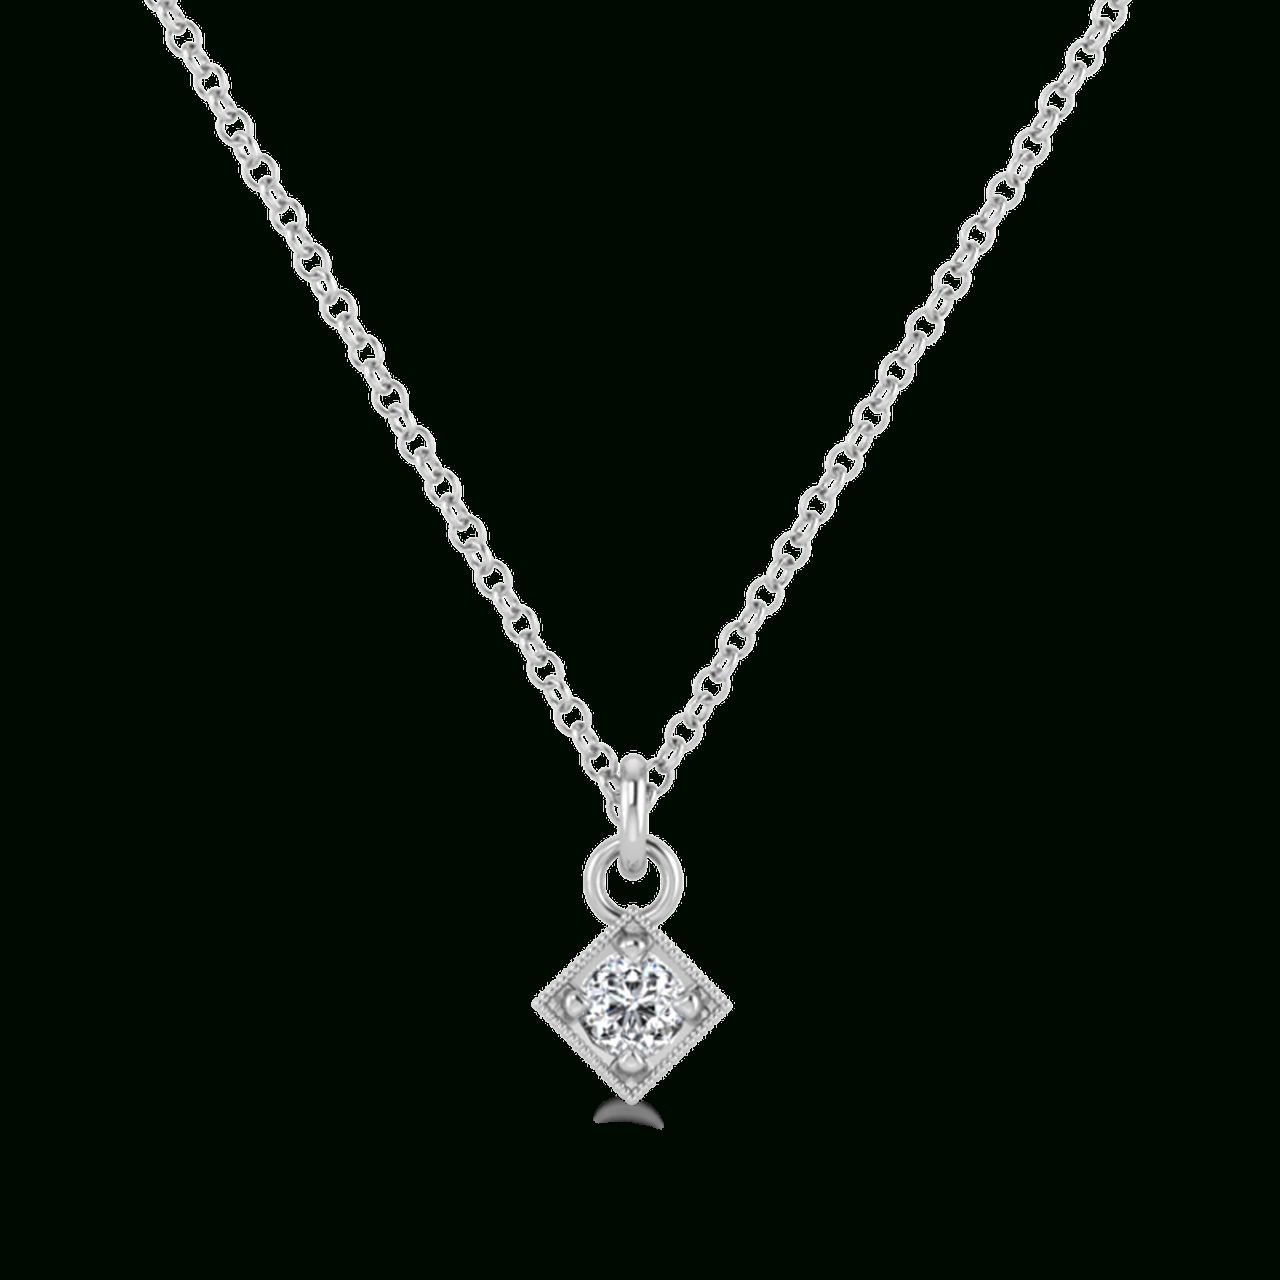 Tiny Square Diamond Necklace In 2020 Small Diamond Necklaces (View 9 of 25)